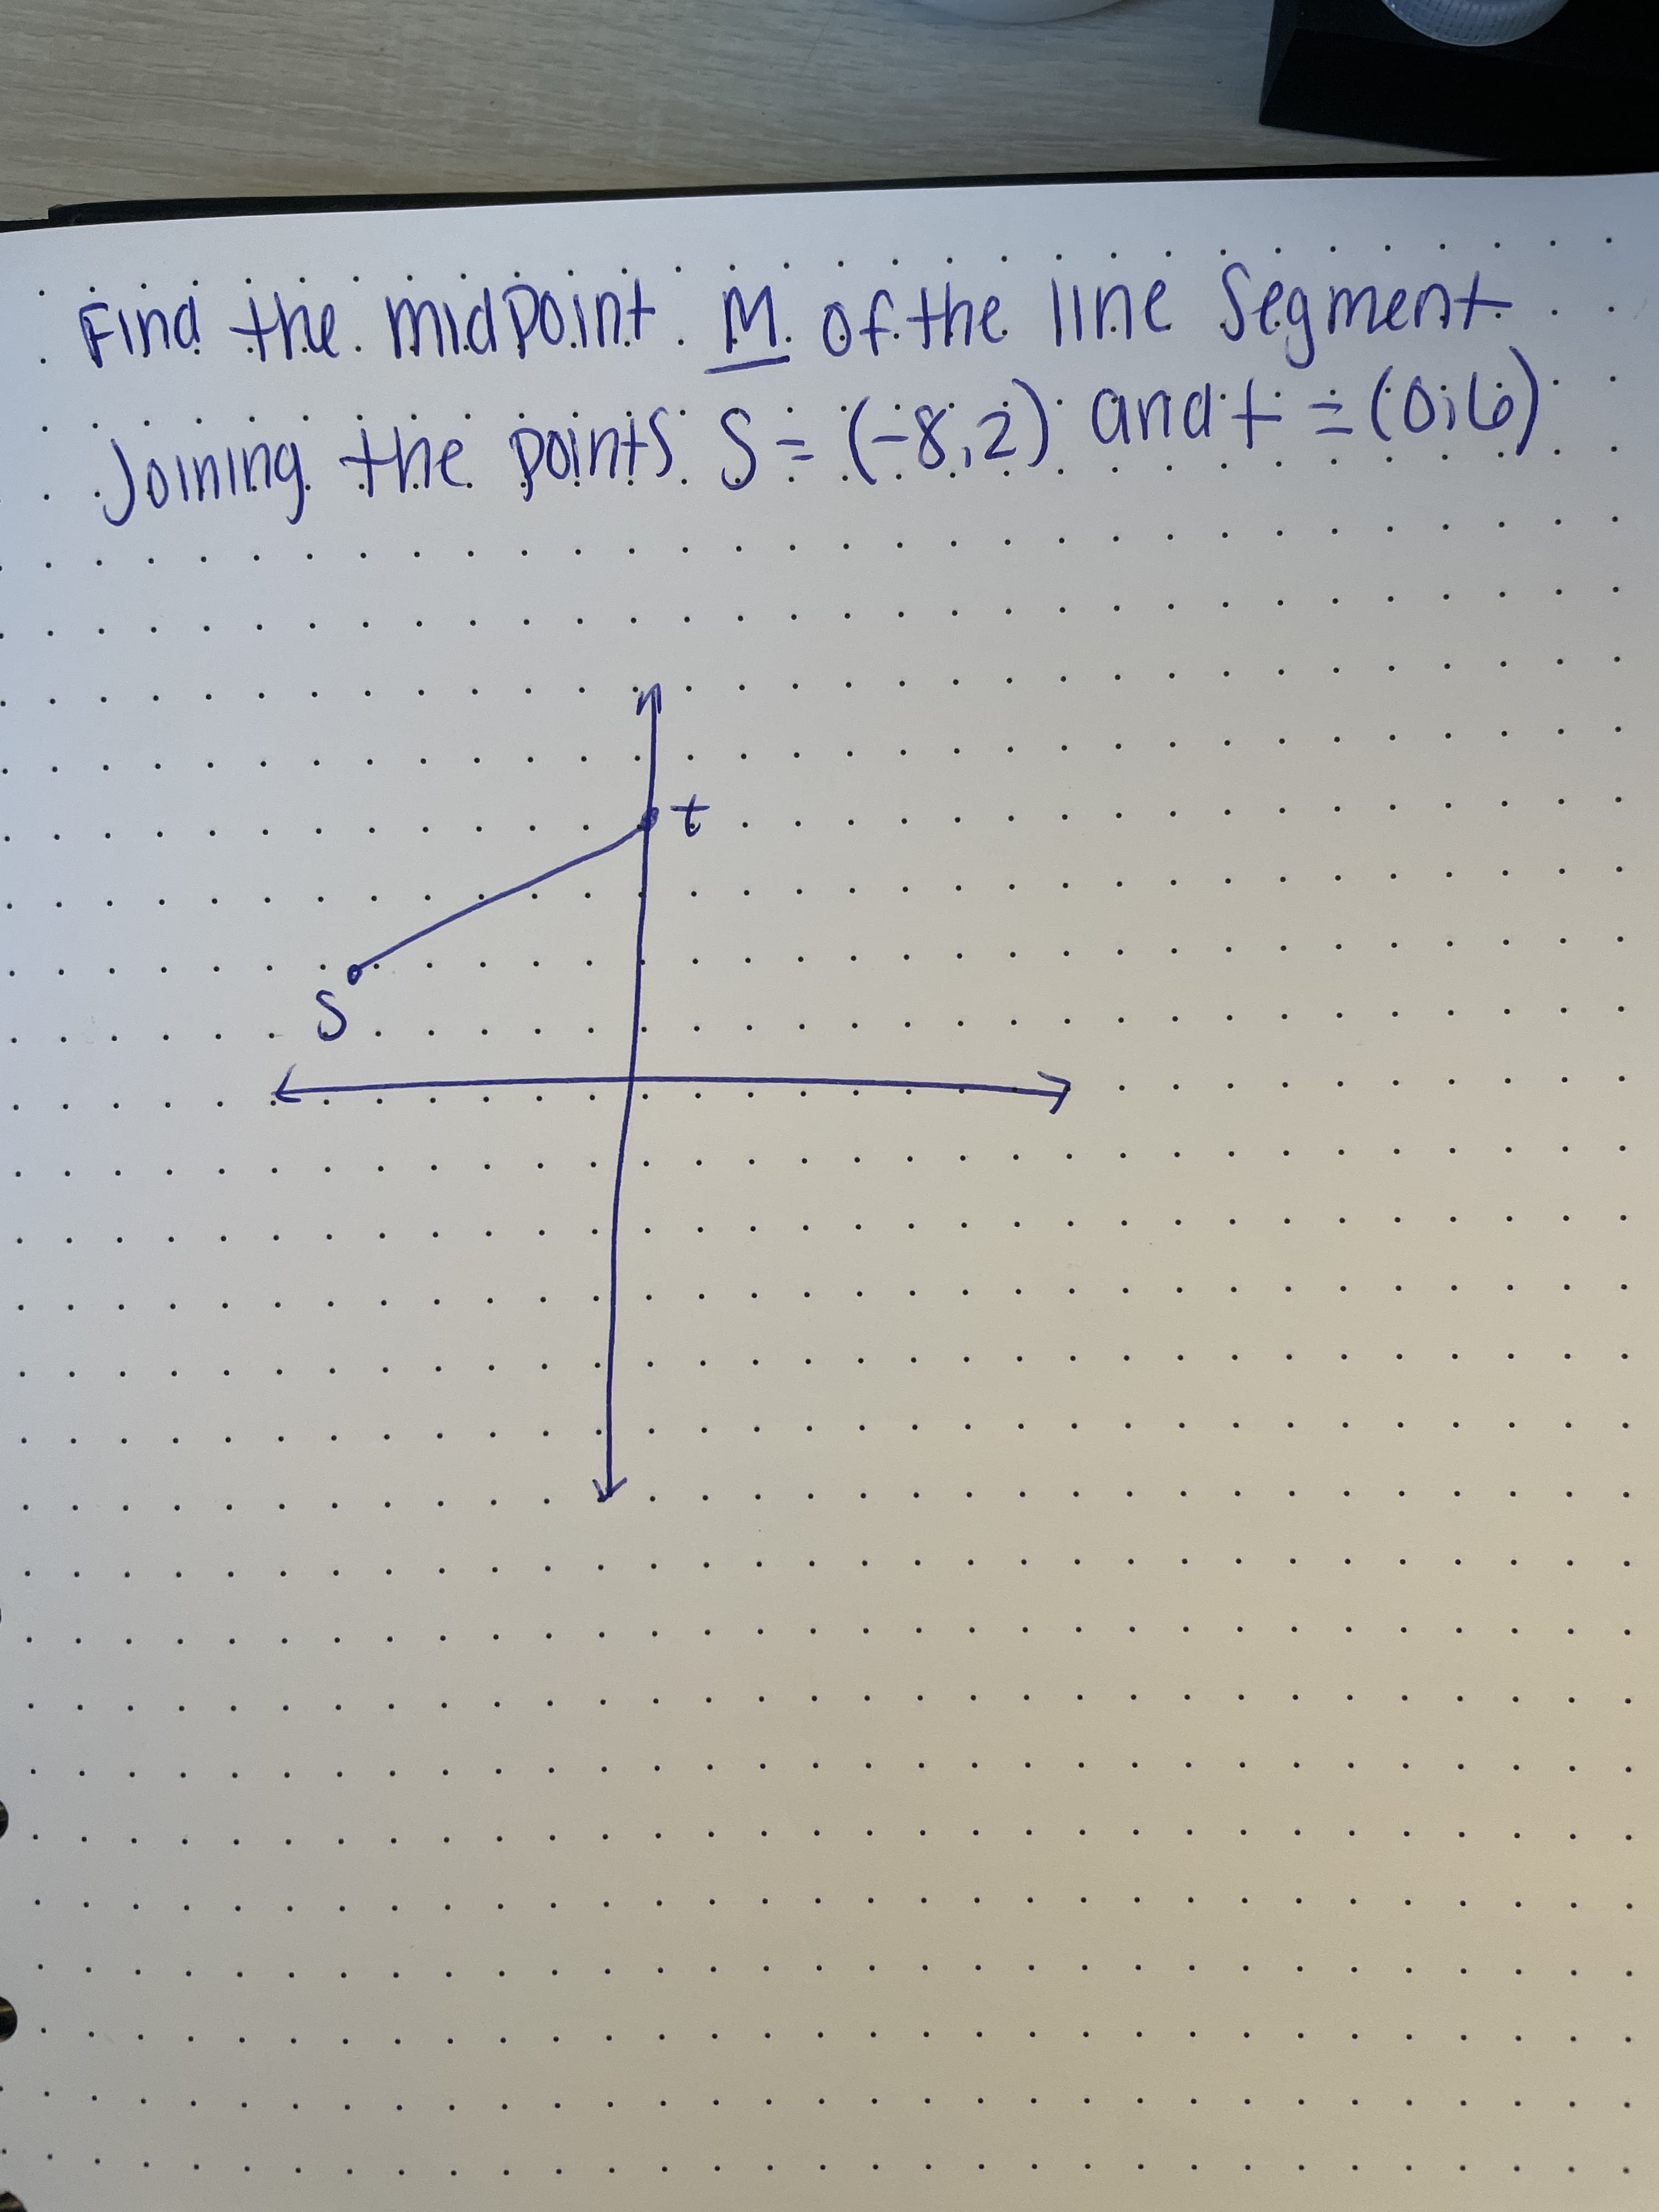 to
Find the mid Point. M.of the line Segment
Joiningthe points. S:(-8,2)) and'f =(0i6)
